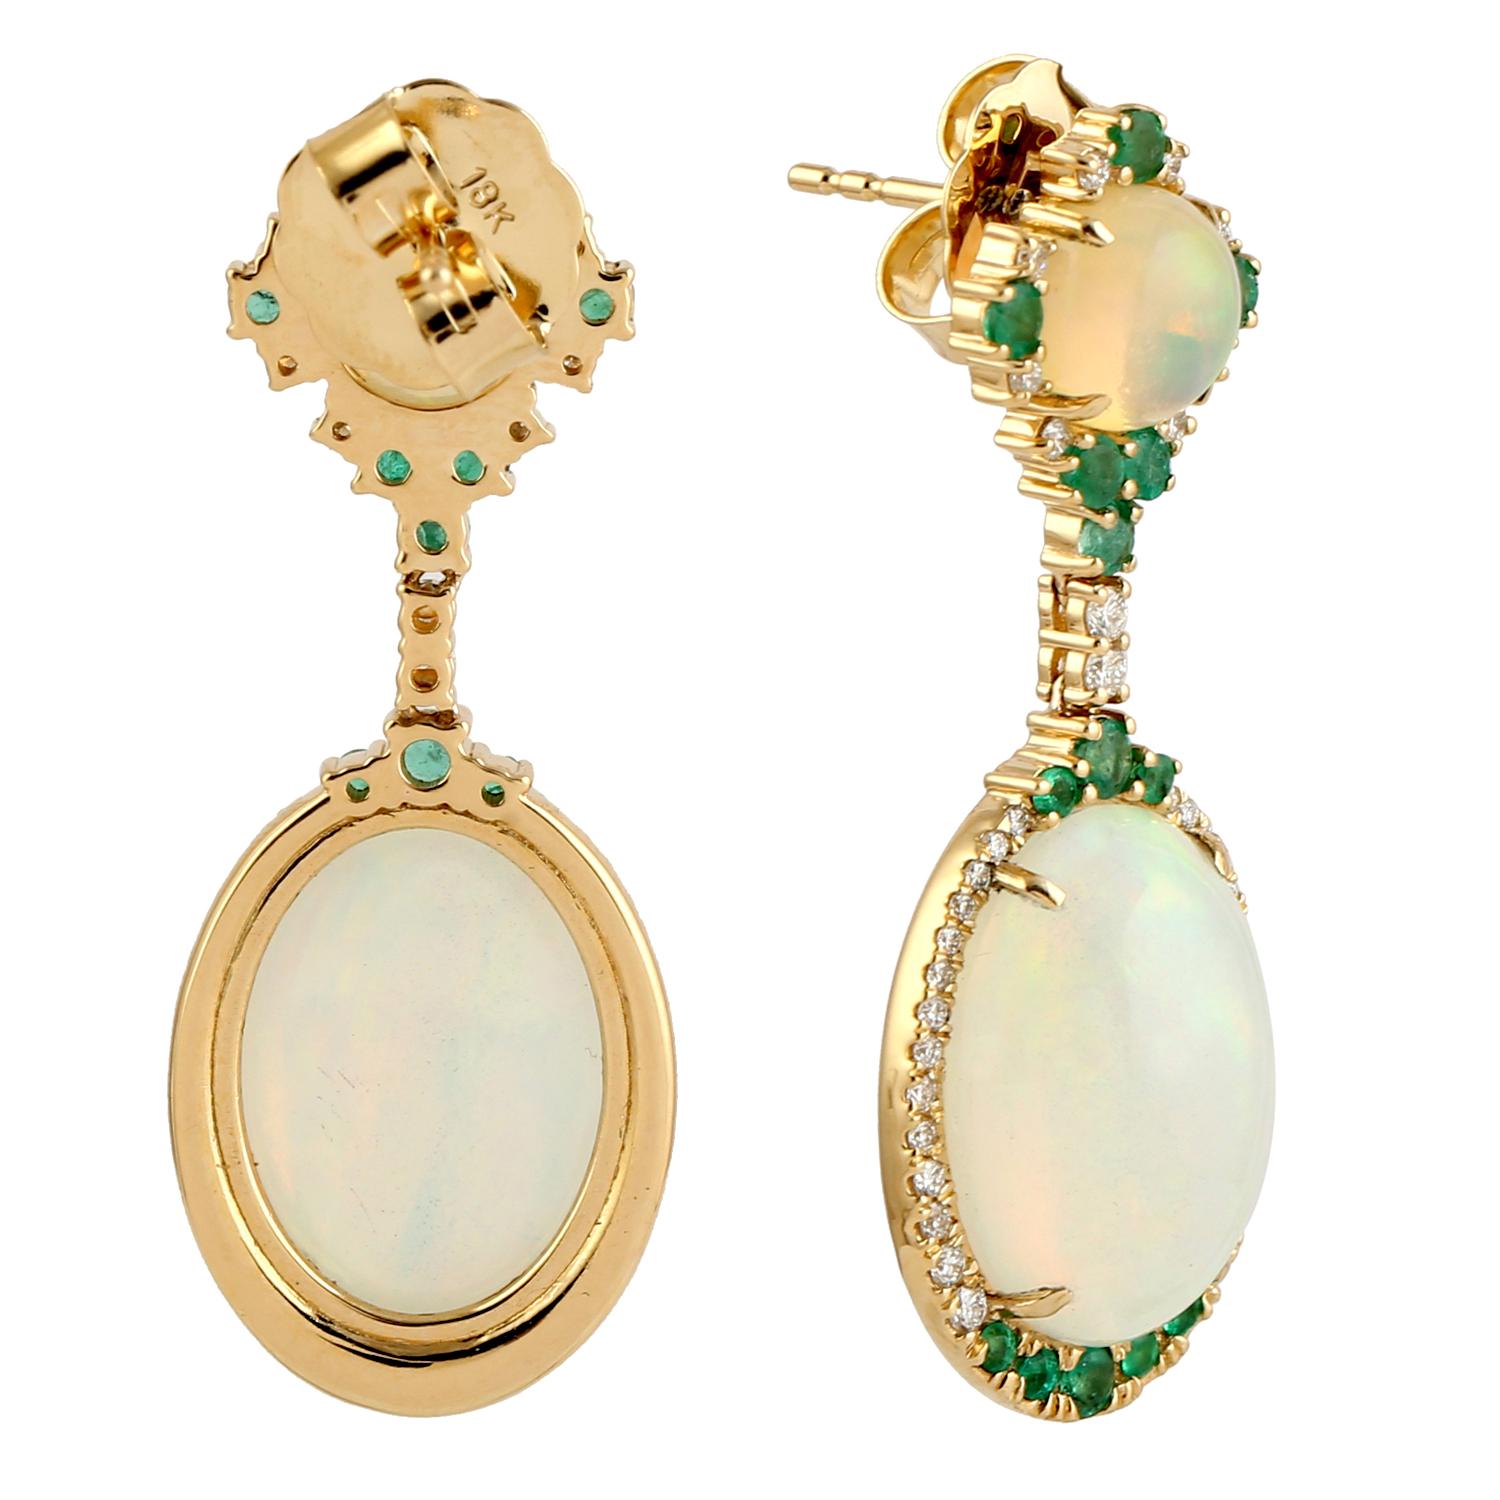 Cast in 14 karat gold. These earrings are hand set in 11.75 carats Ethiopian opal, 1.09 carats emerald, and .59 carats of sparkling diamonds. 

FOLLOW MEGHNA JEWELS storefront to view the latest collection & exclusive pieces. Meghna Jewels is